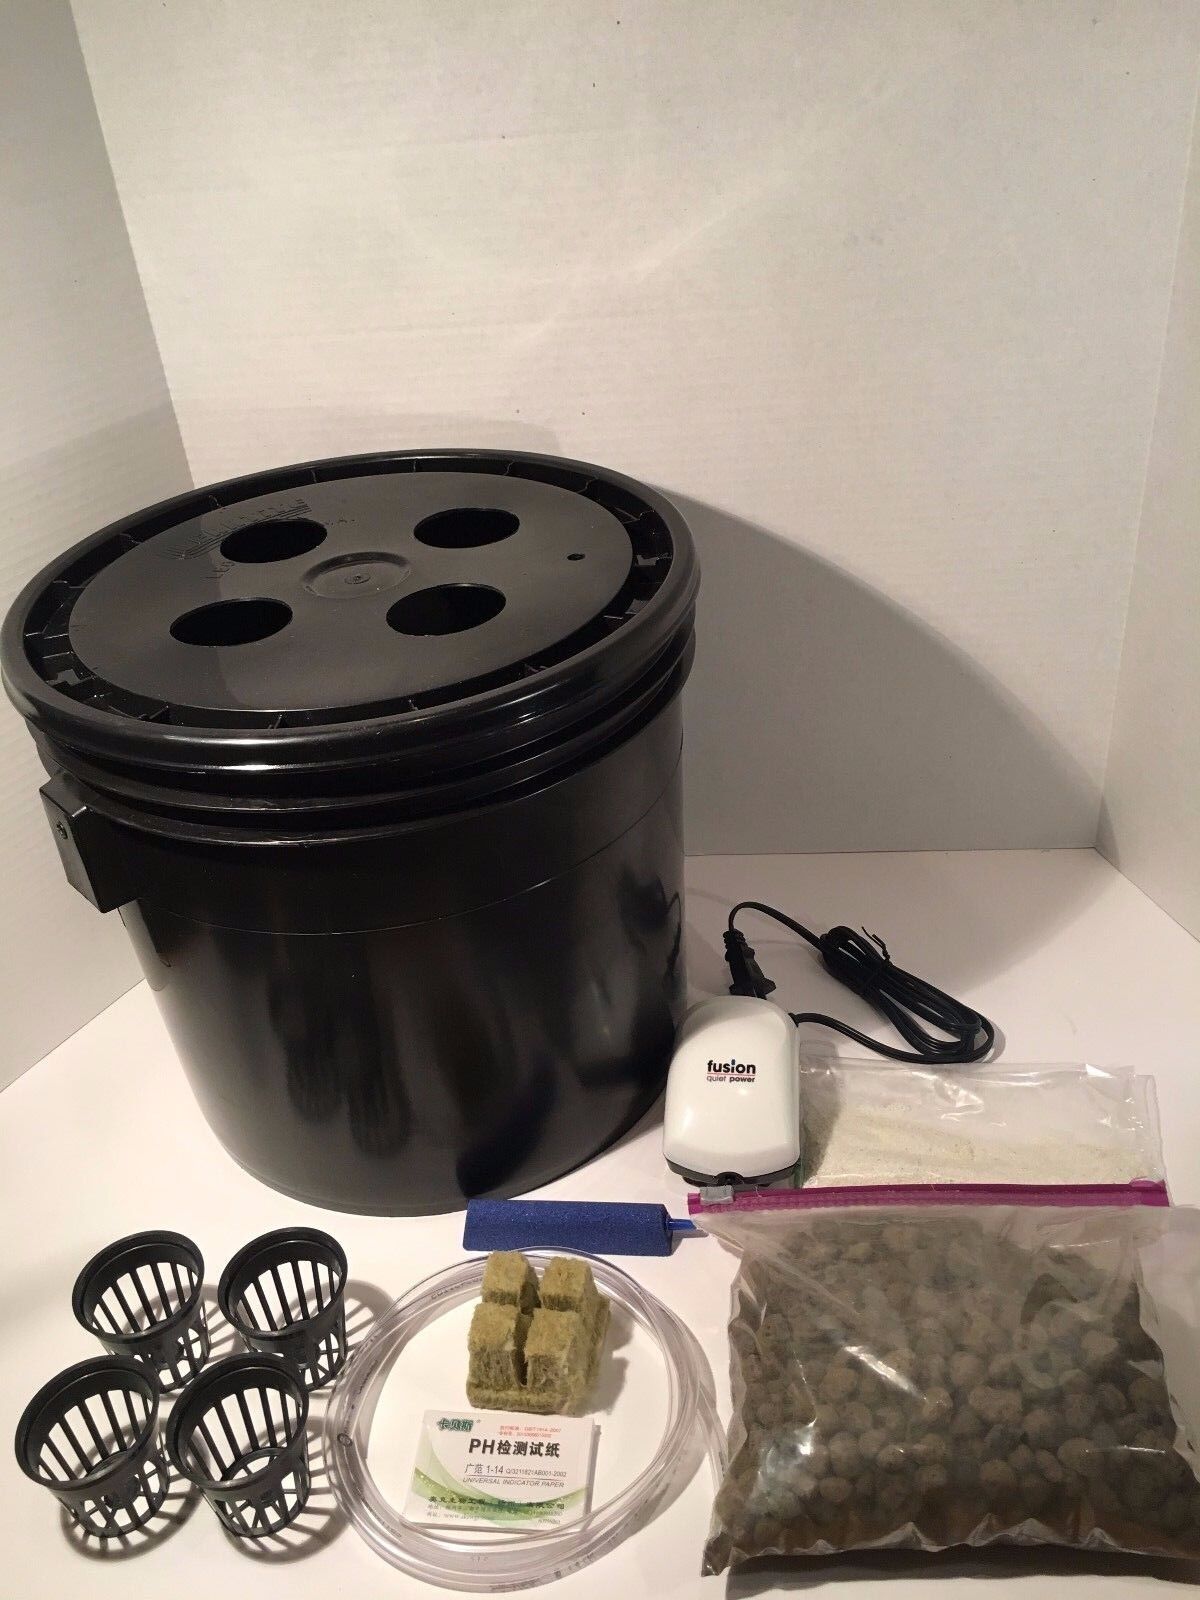 Complete Hydroponic System - 4 Site DWC Hydroponic Grow Kit - Bubble Bucket